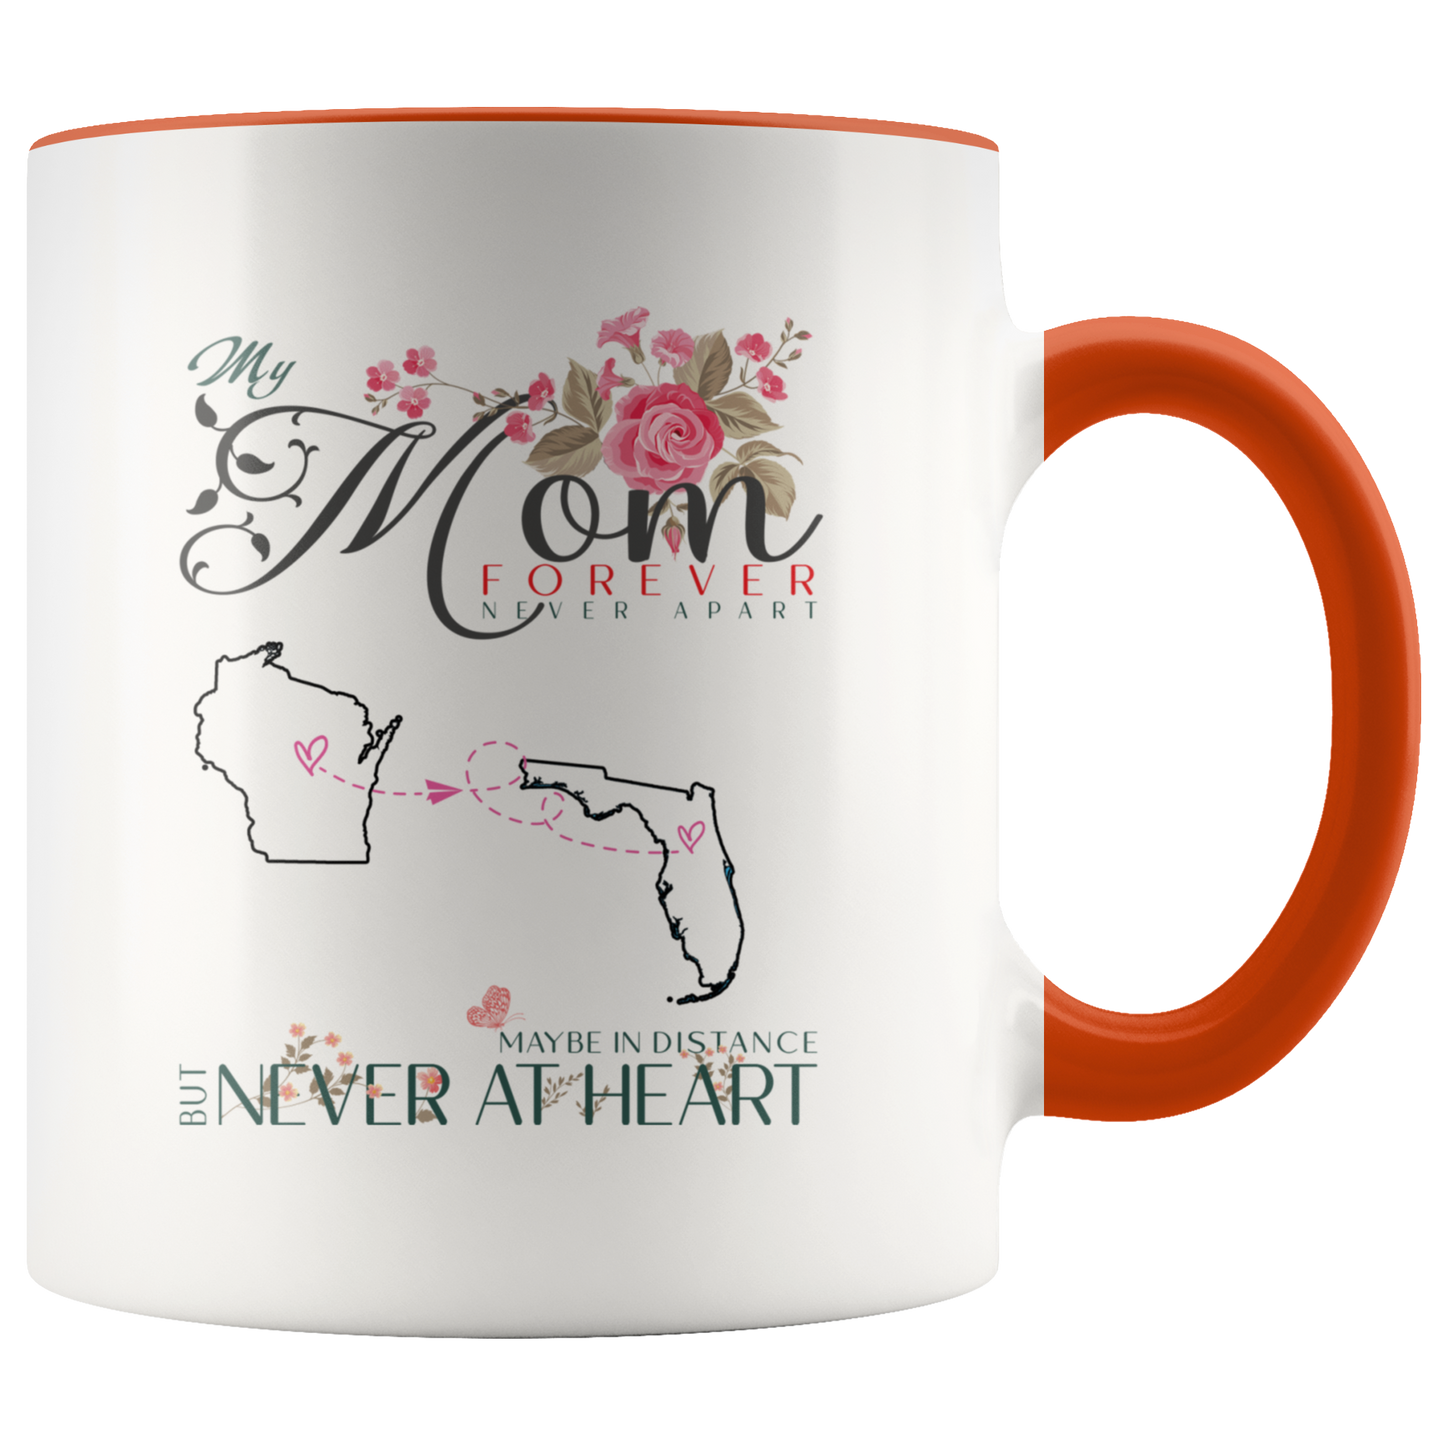 M-20321571-sp-26028 - [ Wisconsin | Florida ] (CC_Accent_Mug_) Personalized Mothers Day Coffee Mug - My Mom Forever Never A